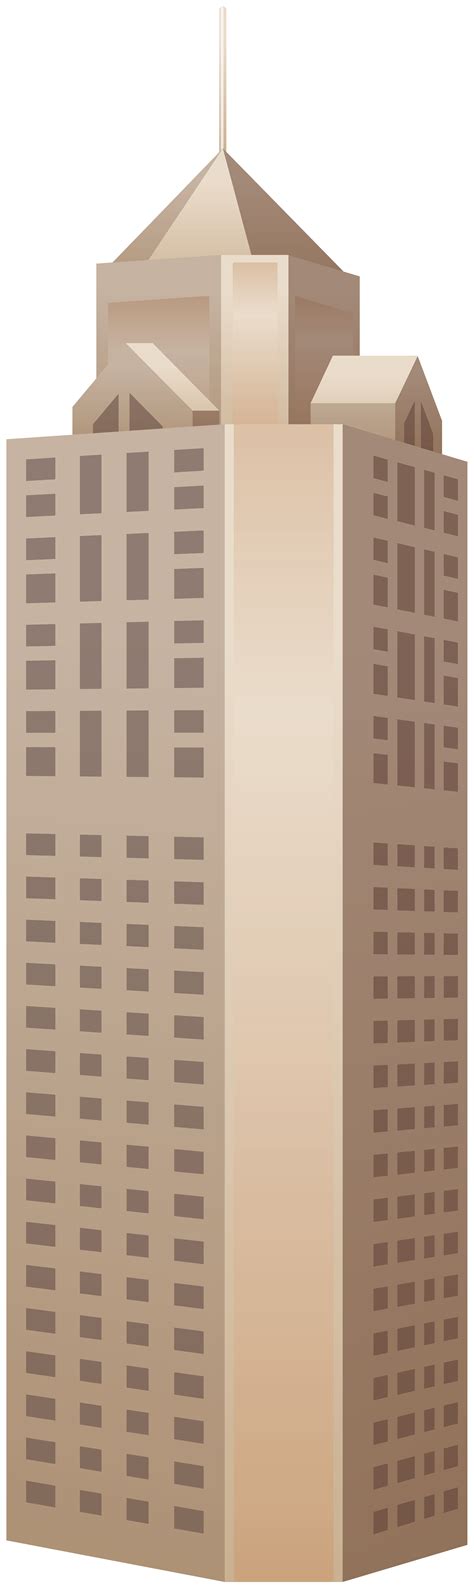 Skyscraper Clipart Images Free Download On Clipart Library Clip Art